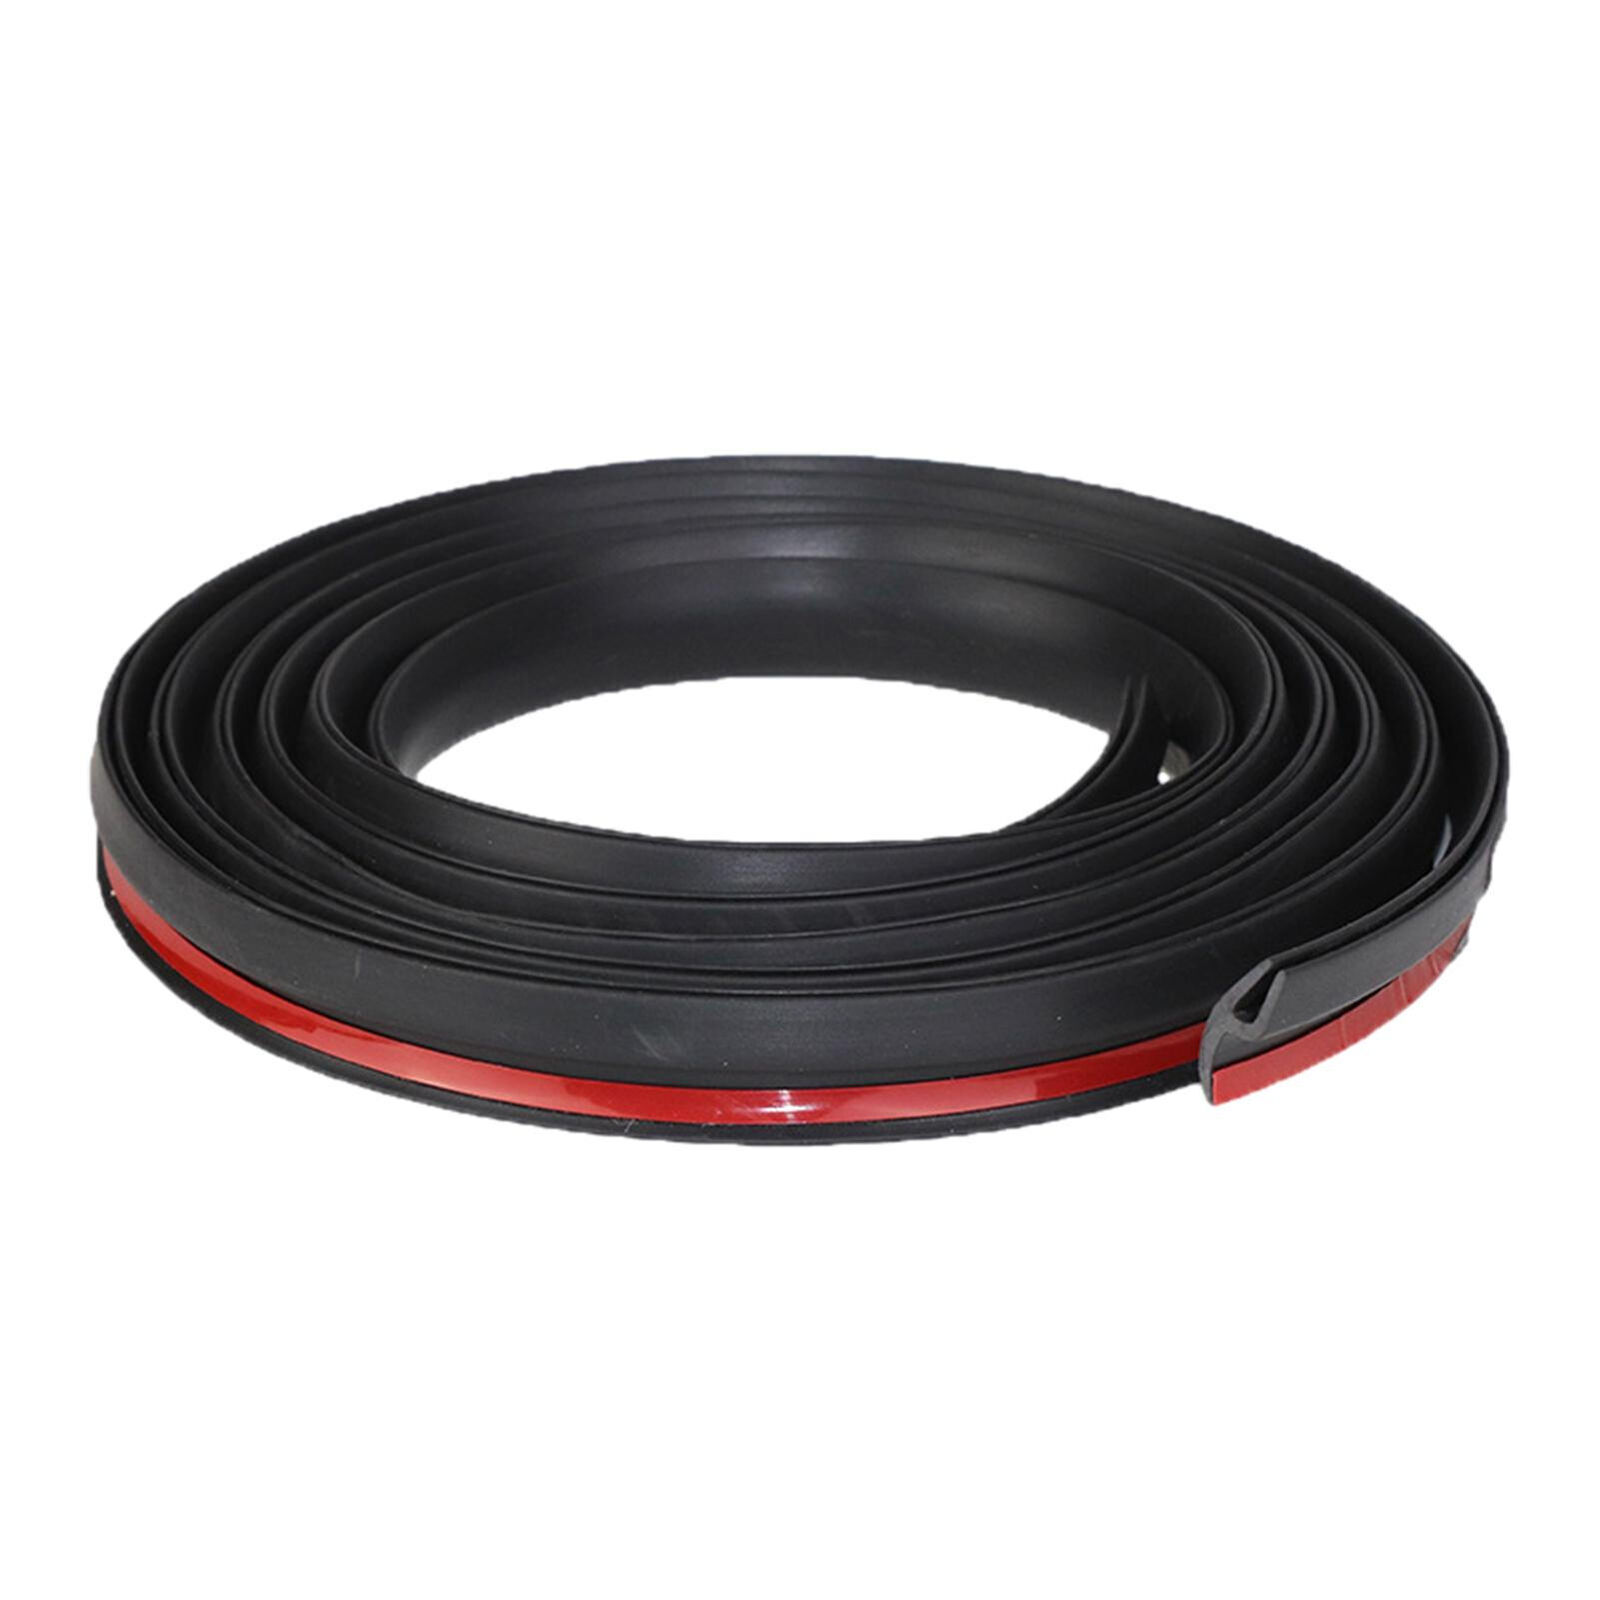 Rubber Car Seal Strip Trim For Front Rear Windshield Sunroof Weatherstrip 1.7 2M